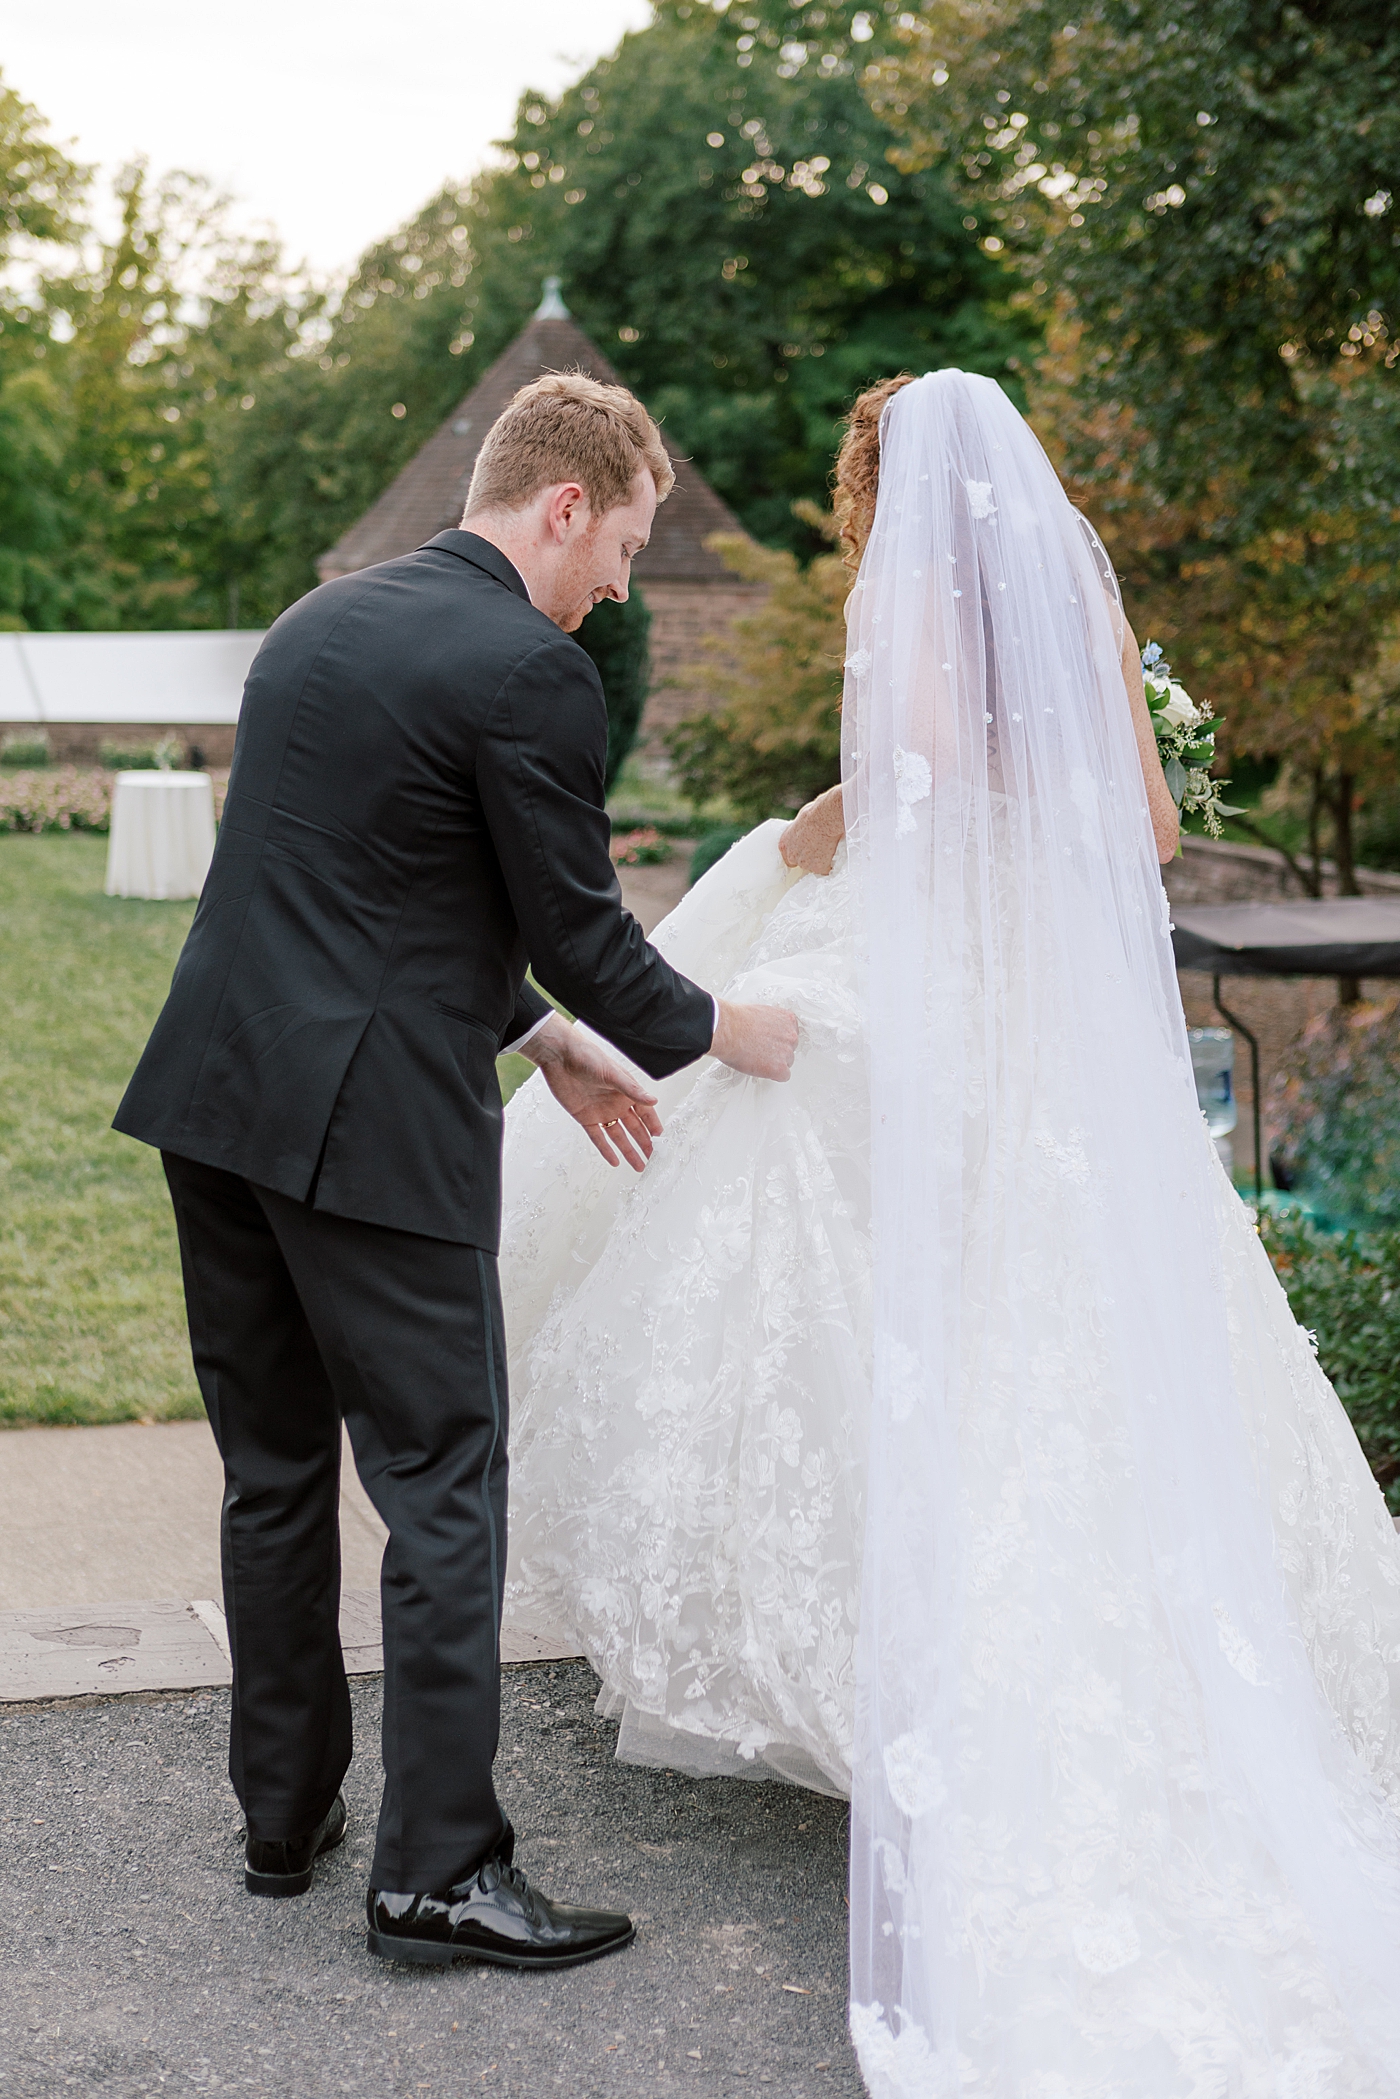 Groom helping bride with her dress during Tyler Gardens Wedding | Image by Hope Helmuth Photography